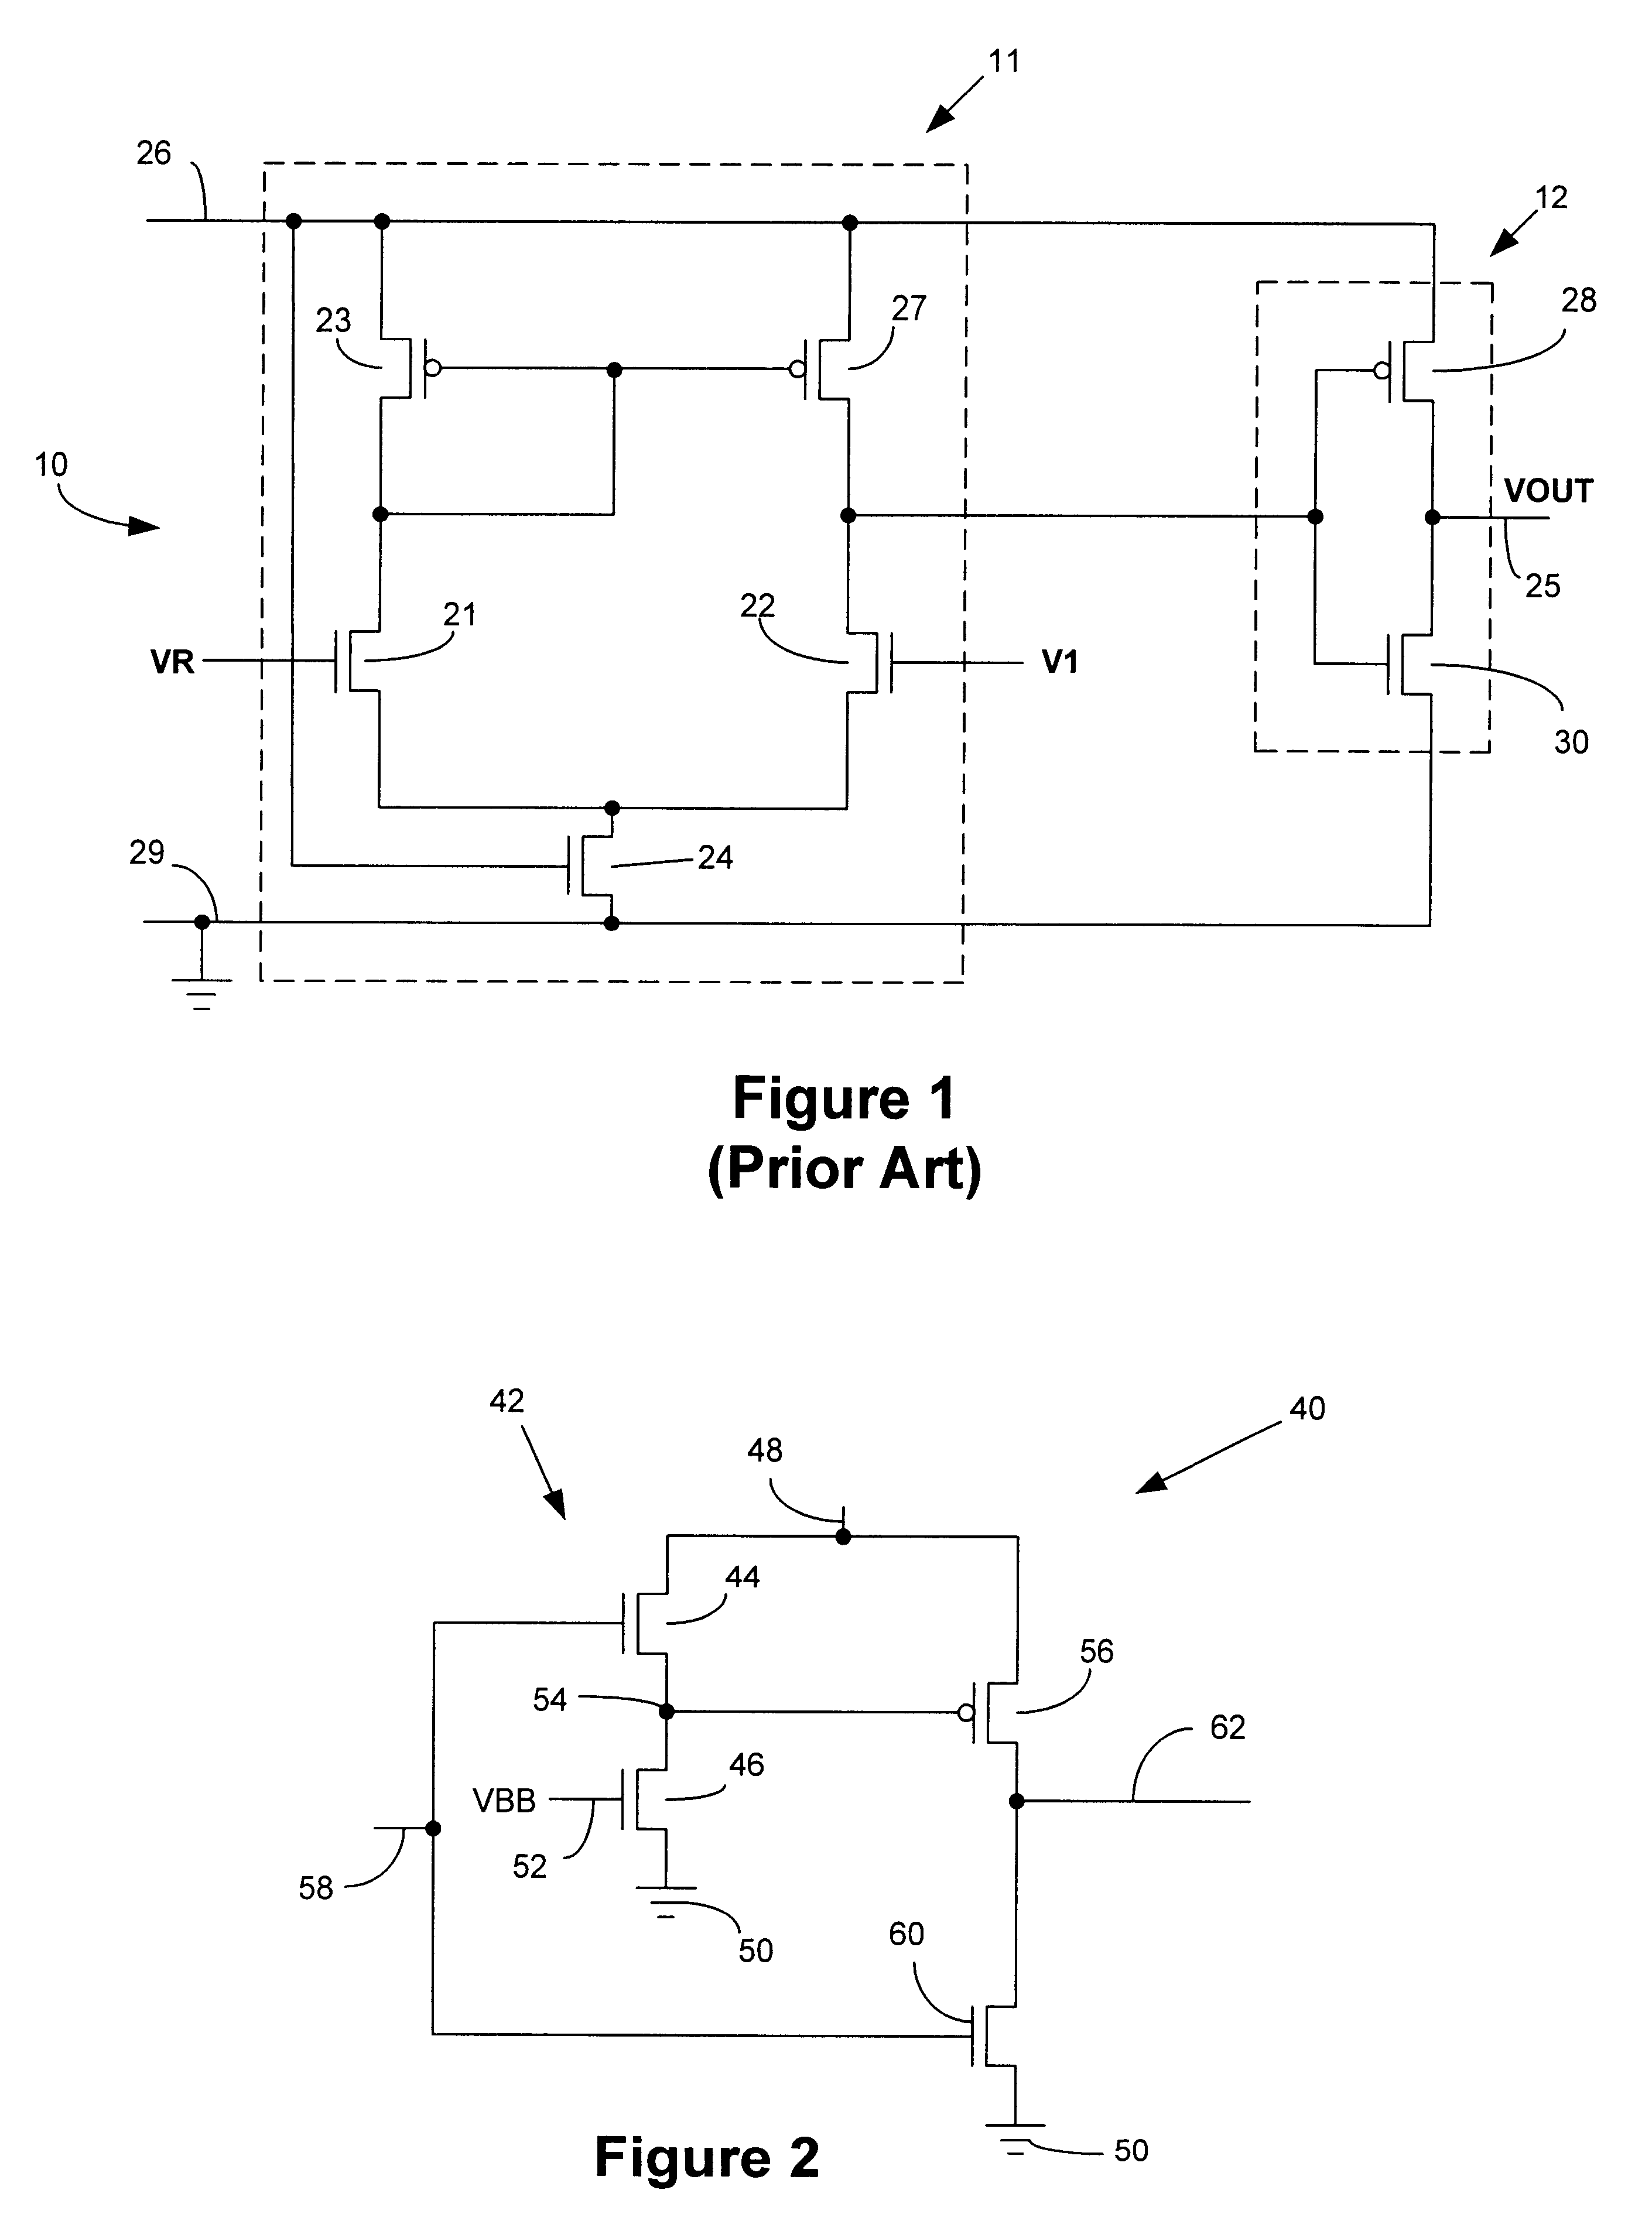 Integrated circuit comparator or amplifier